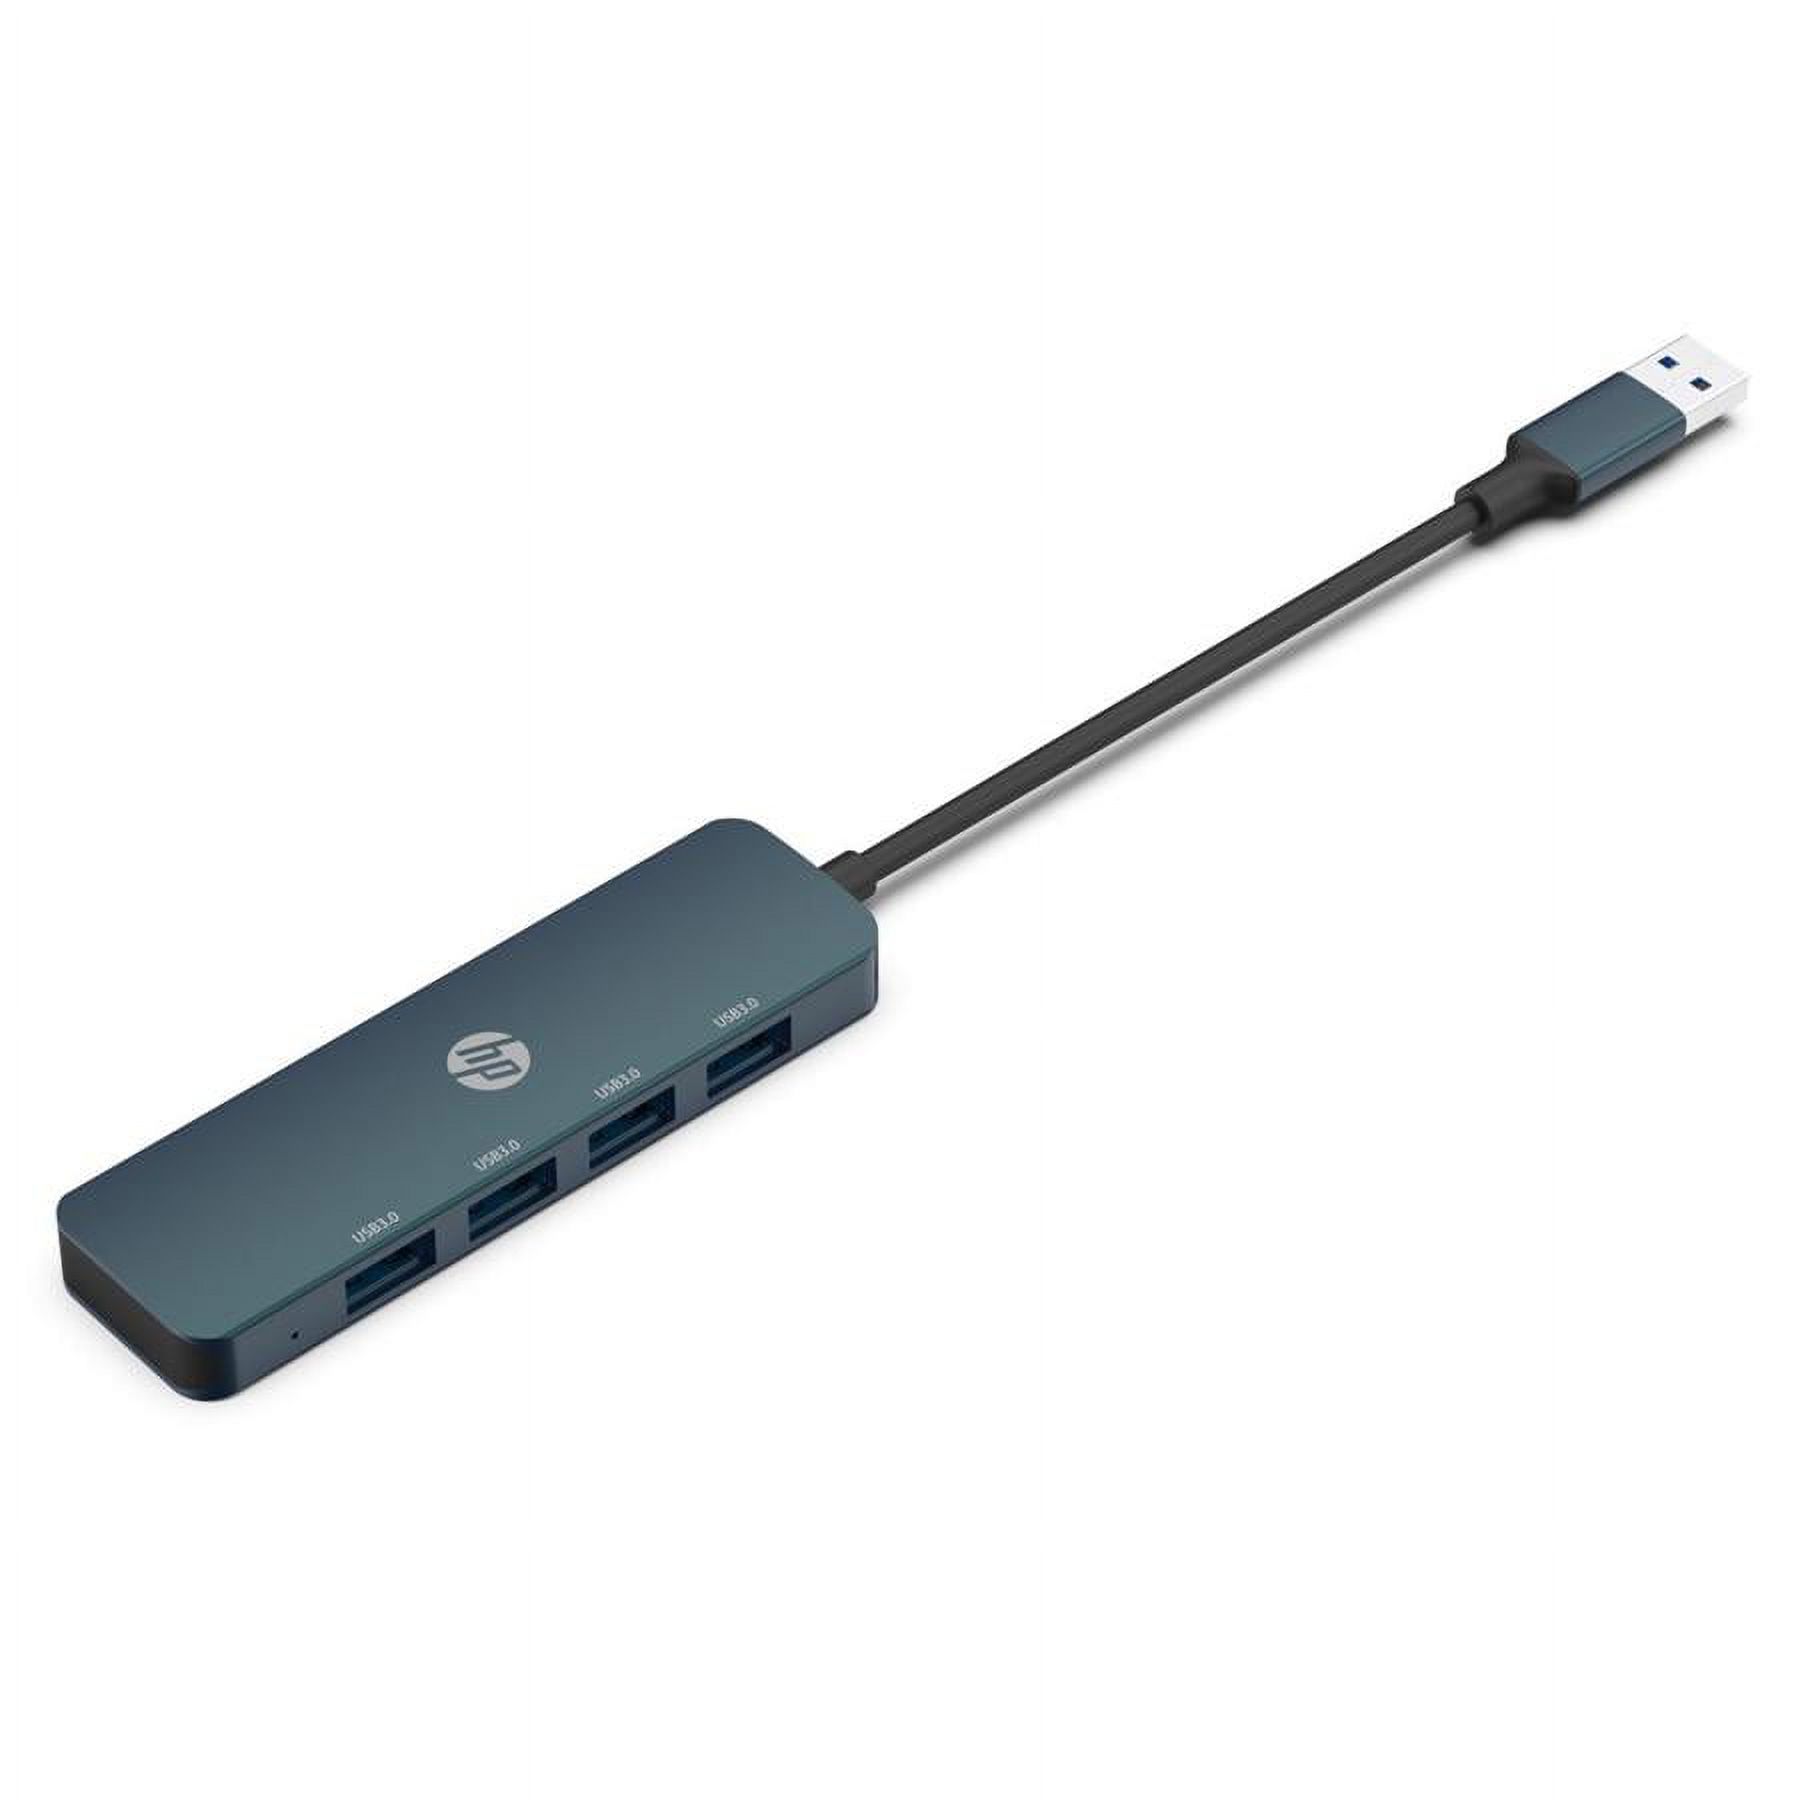 HP - 4 Port USB 3.0 Hub, Up to 5Gbps, Compatible with USB2.0 / USB1.1 for Mac, PC or Mobile Hard Drive, Black - image 2 of 5